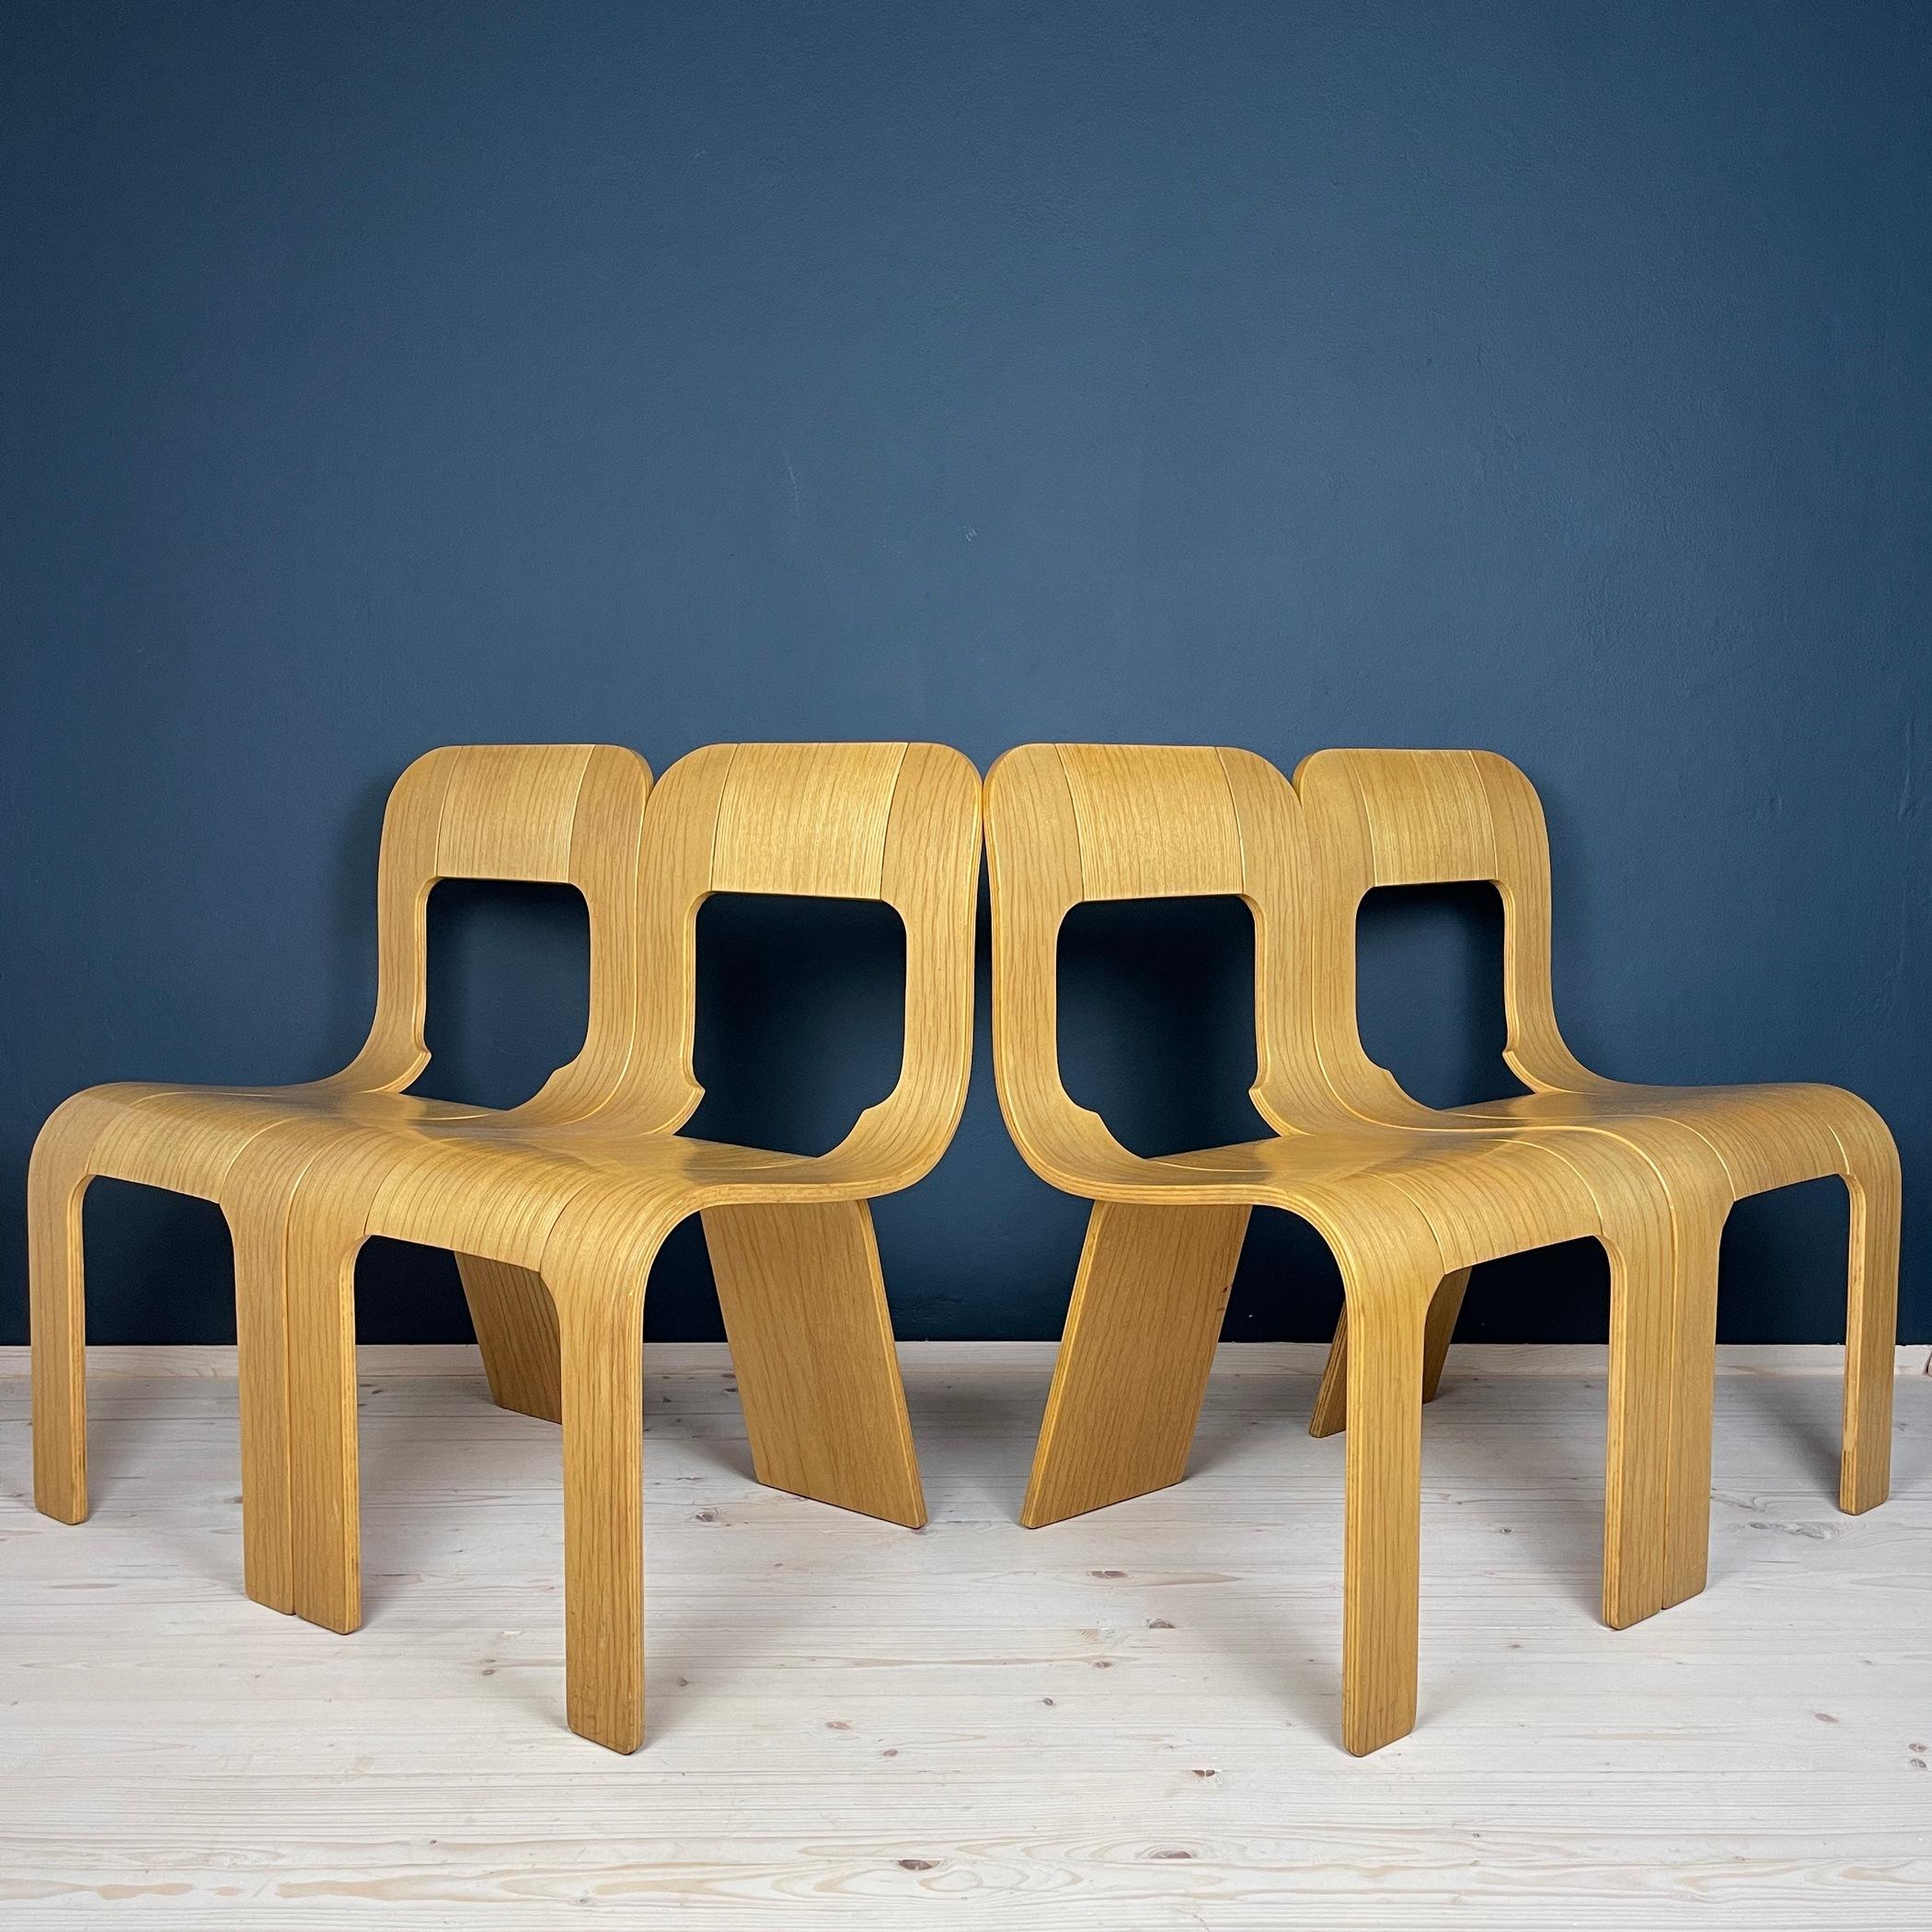 The set of 4 dining chairs 